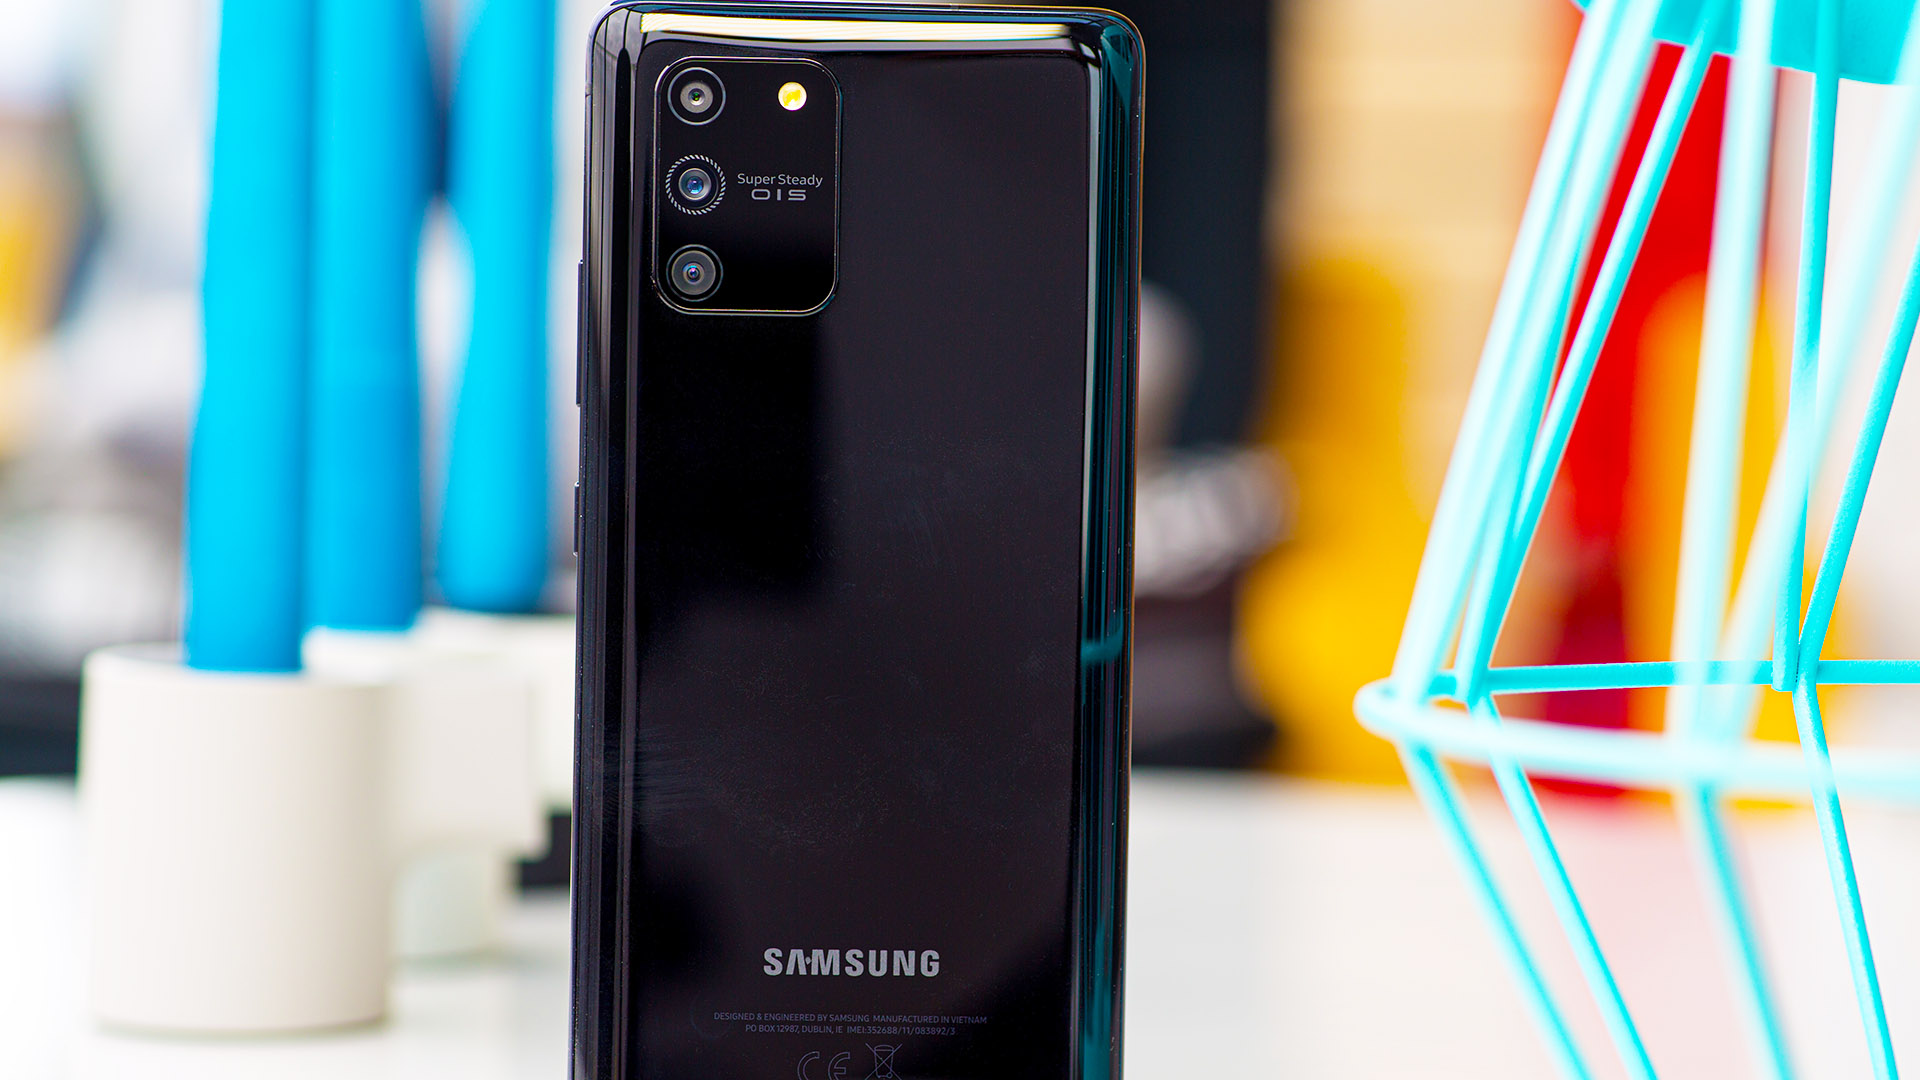 Samsung Galaxy S10 Lite Review Specs And Price In Bangladesh